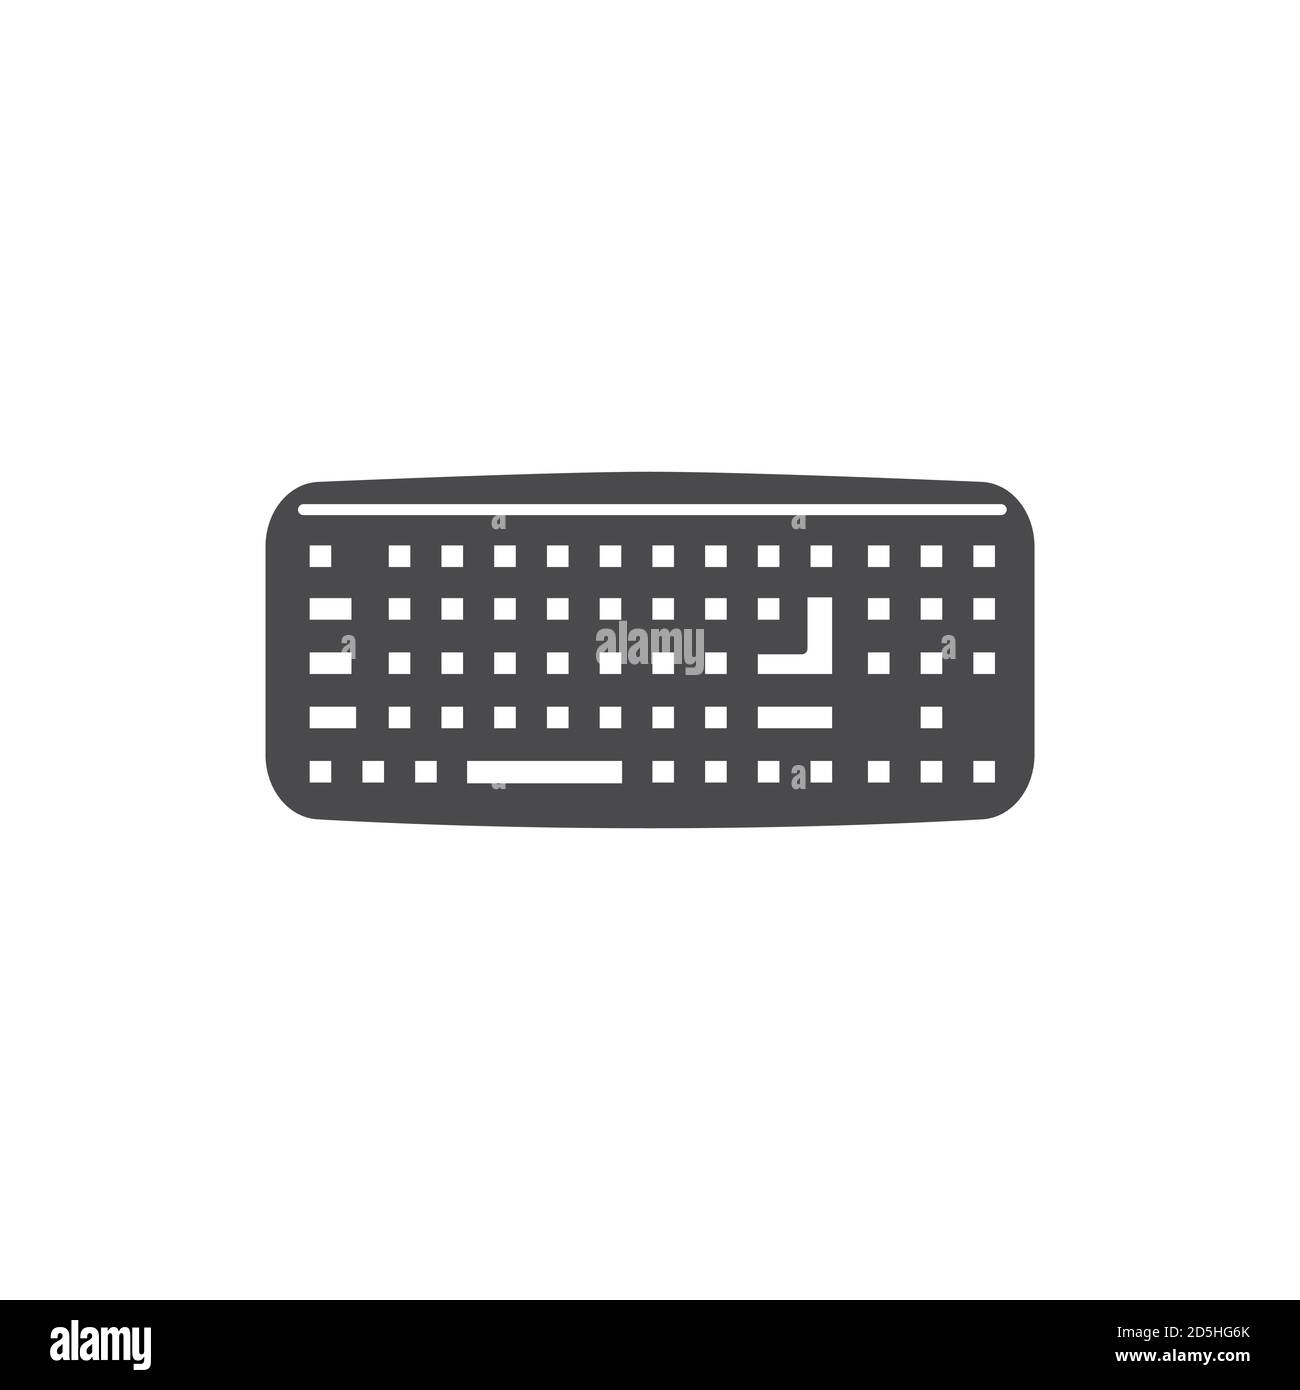 Keyboard black glyph icon. Input device. Allows a person to enter letters, numbers, and other symbols. Pictogram for web page, mobile app, promo. UI Stock Vector